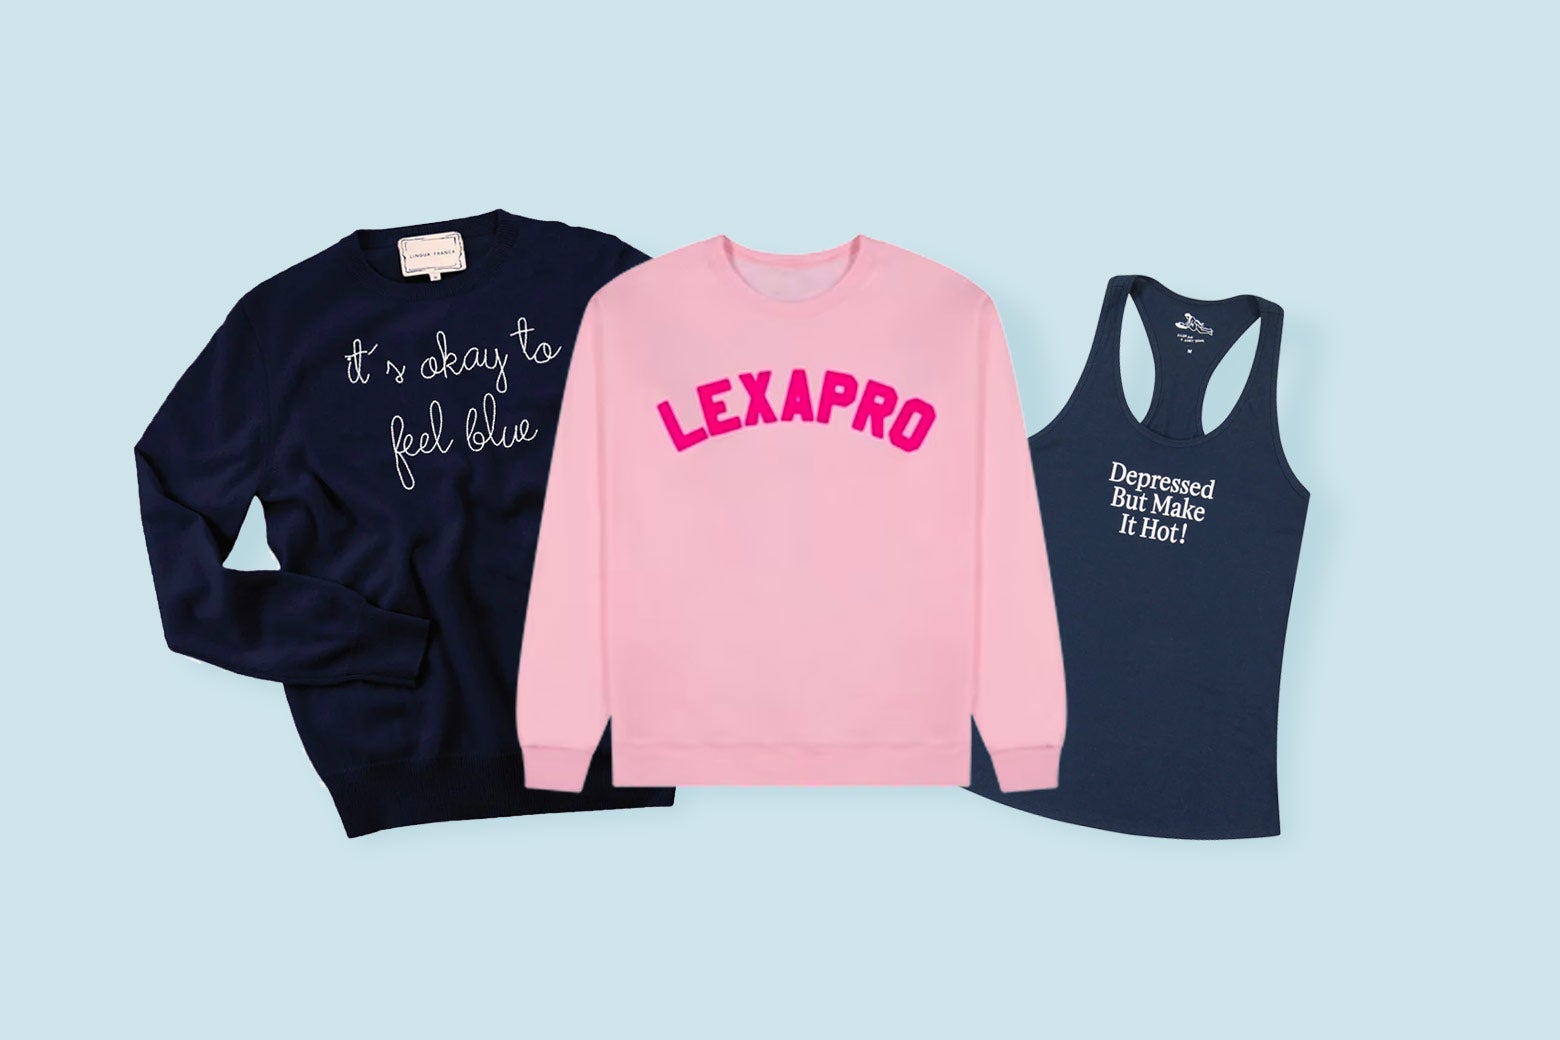 Honestly, I Can’t Stand the Lexapro Sweatshirt